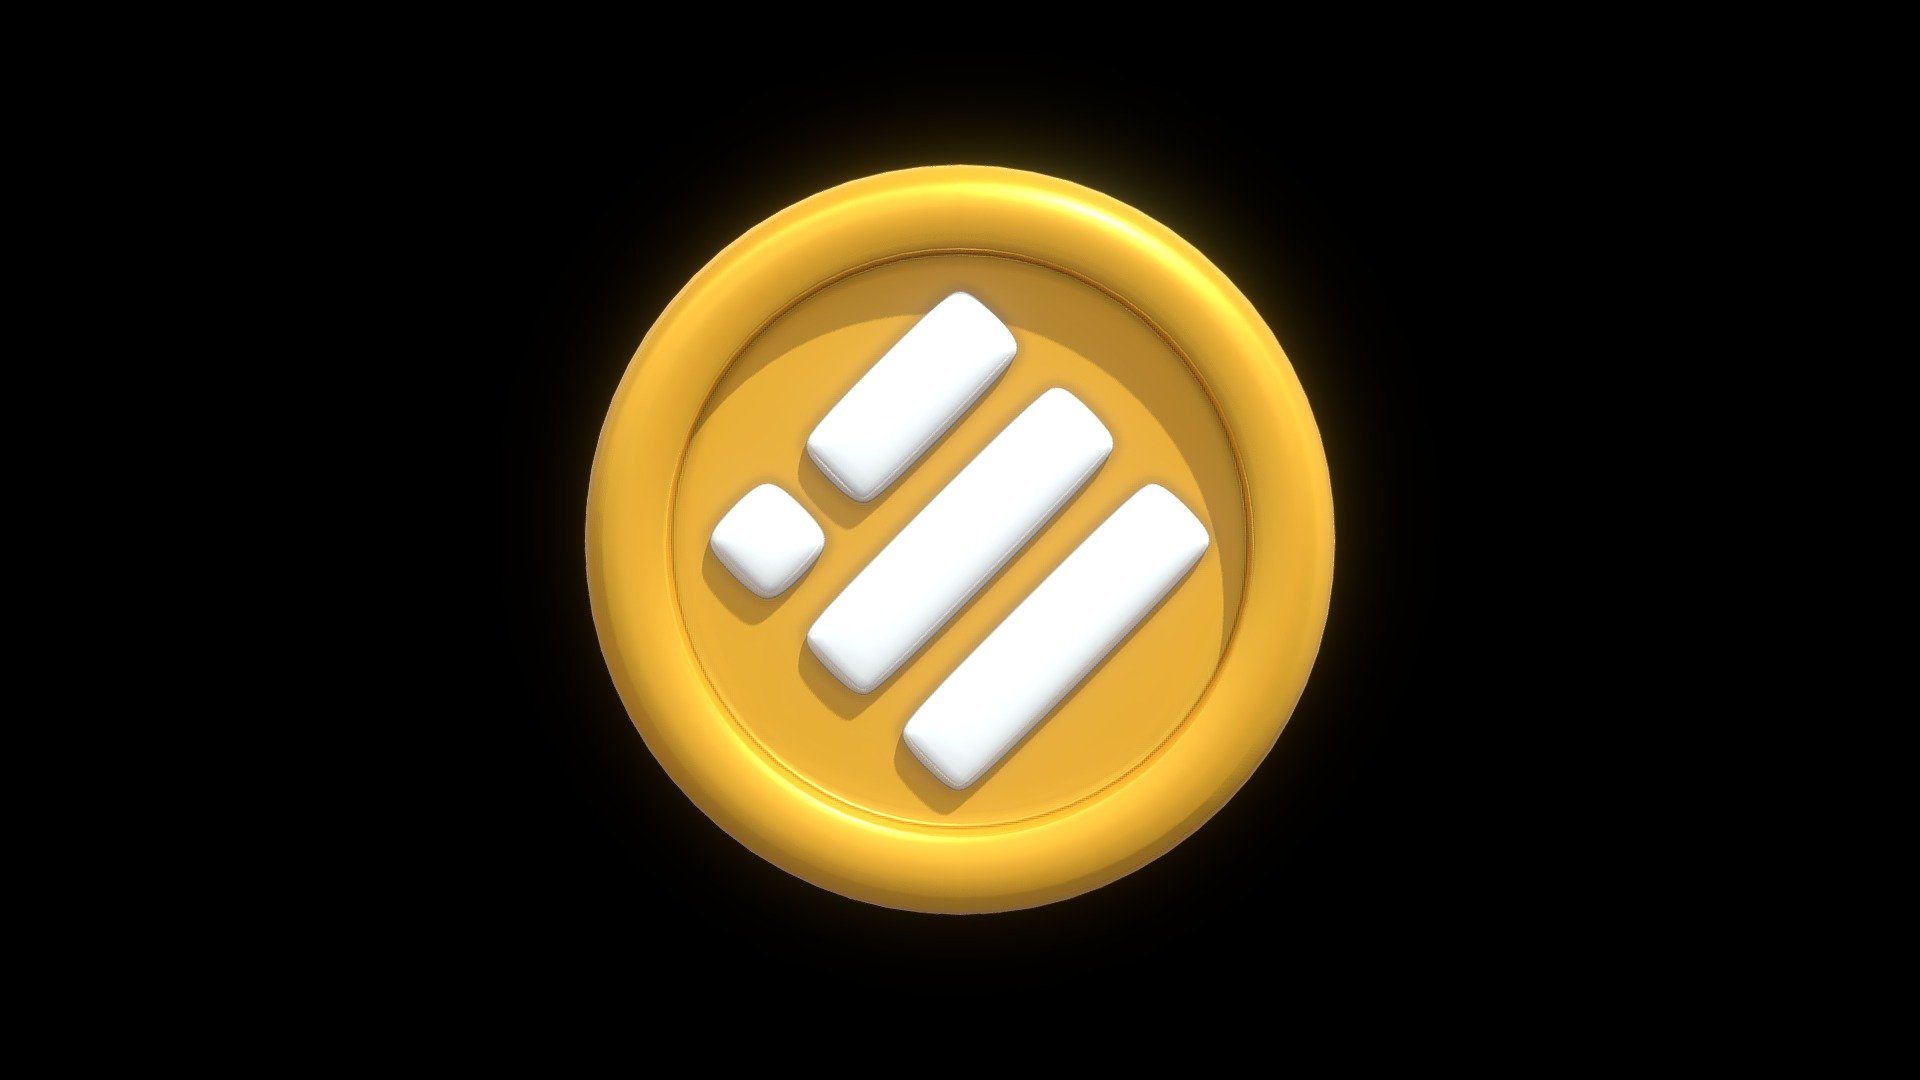 3D Binance USD or BUSD Gold Crypto Coin with cartoon style Made in Blender 3.3.1

This model does include a TEXTURE, DIFFUSE, METALLIC, AND ROUGHNESS MAP, but if you want to change the color you can change it in the blend file, just use the principled bsdf and play with the Roughness, Metallic, and Base Color parameter 3d model